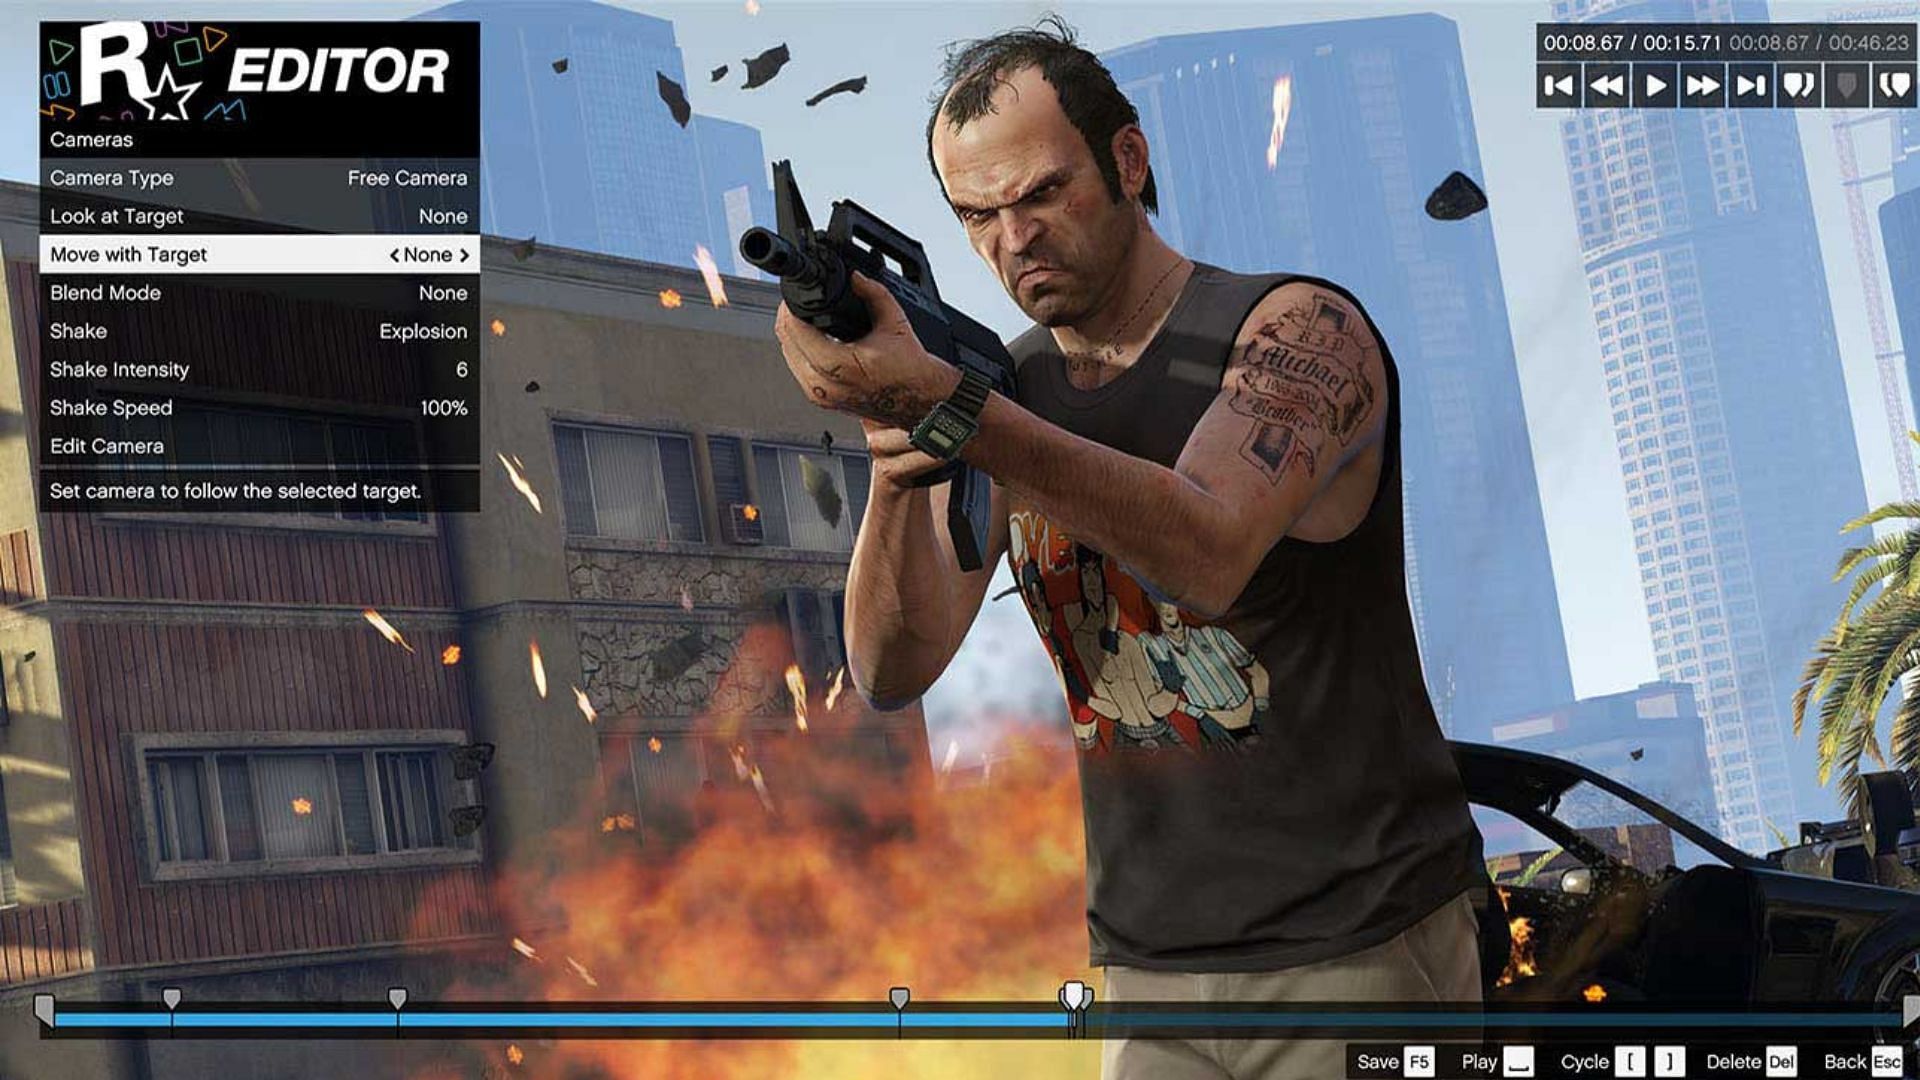 GTA 5 Online ending support for Rockstar Editor on PS4 and Xbox One